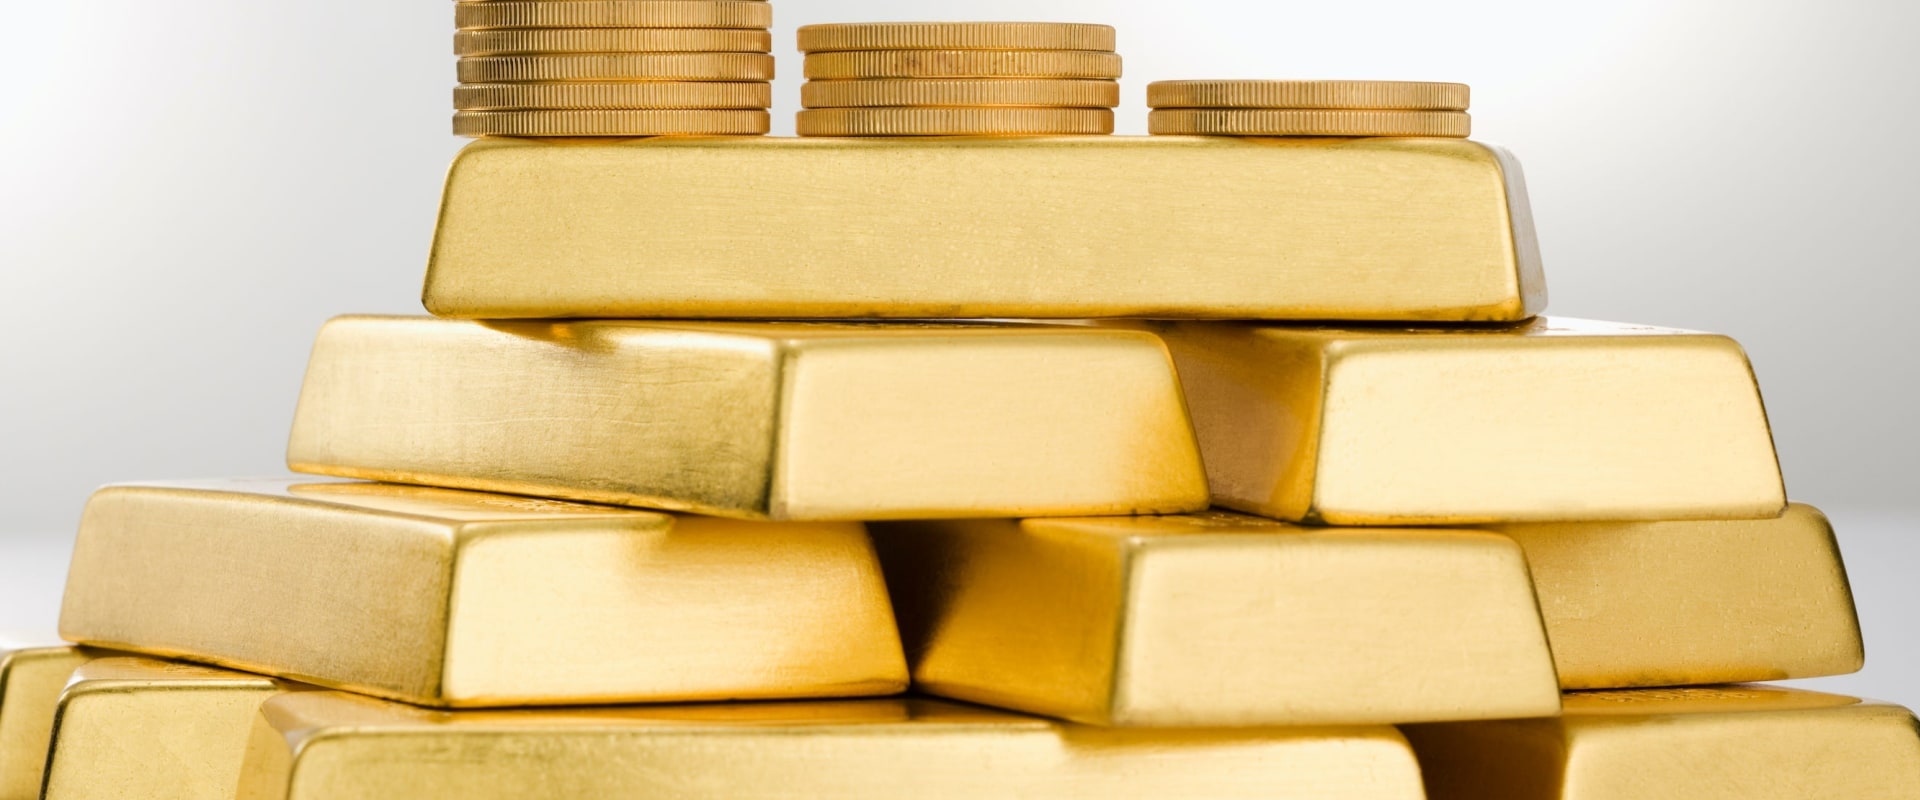 What are the advantages and disadvantages of investing in a self-directed gold ira account compared to other types of iras?